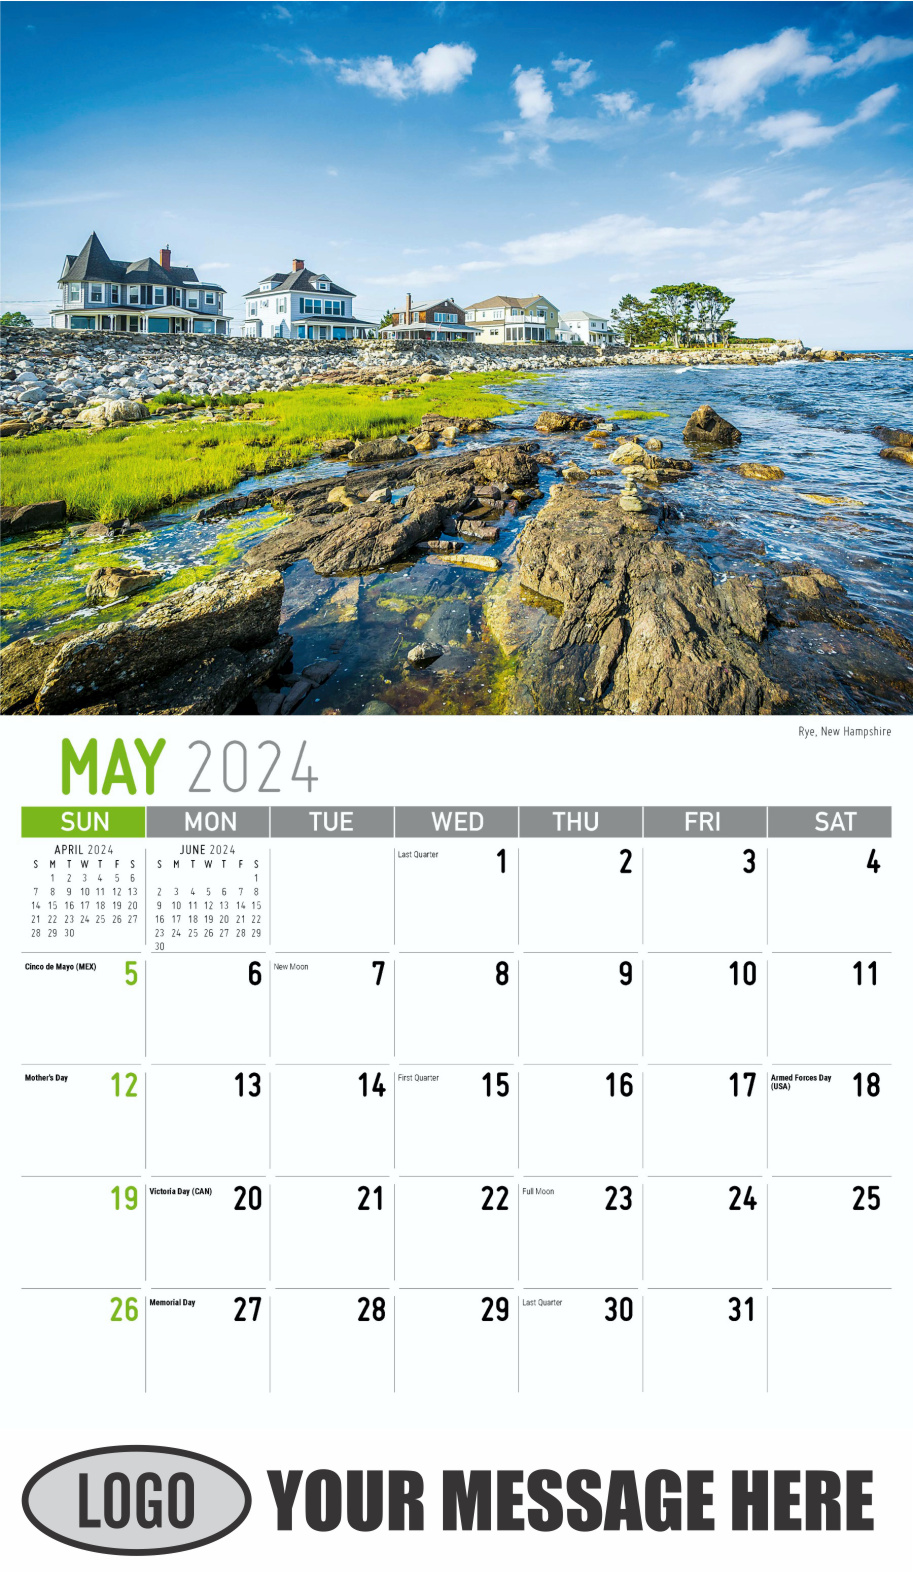 Scenes of New England 2024 Business Advertising Wall Calendar - May